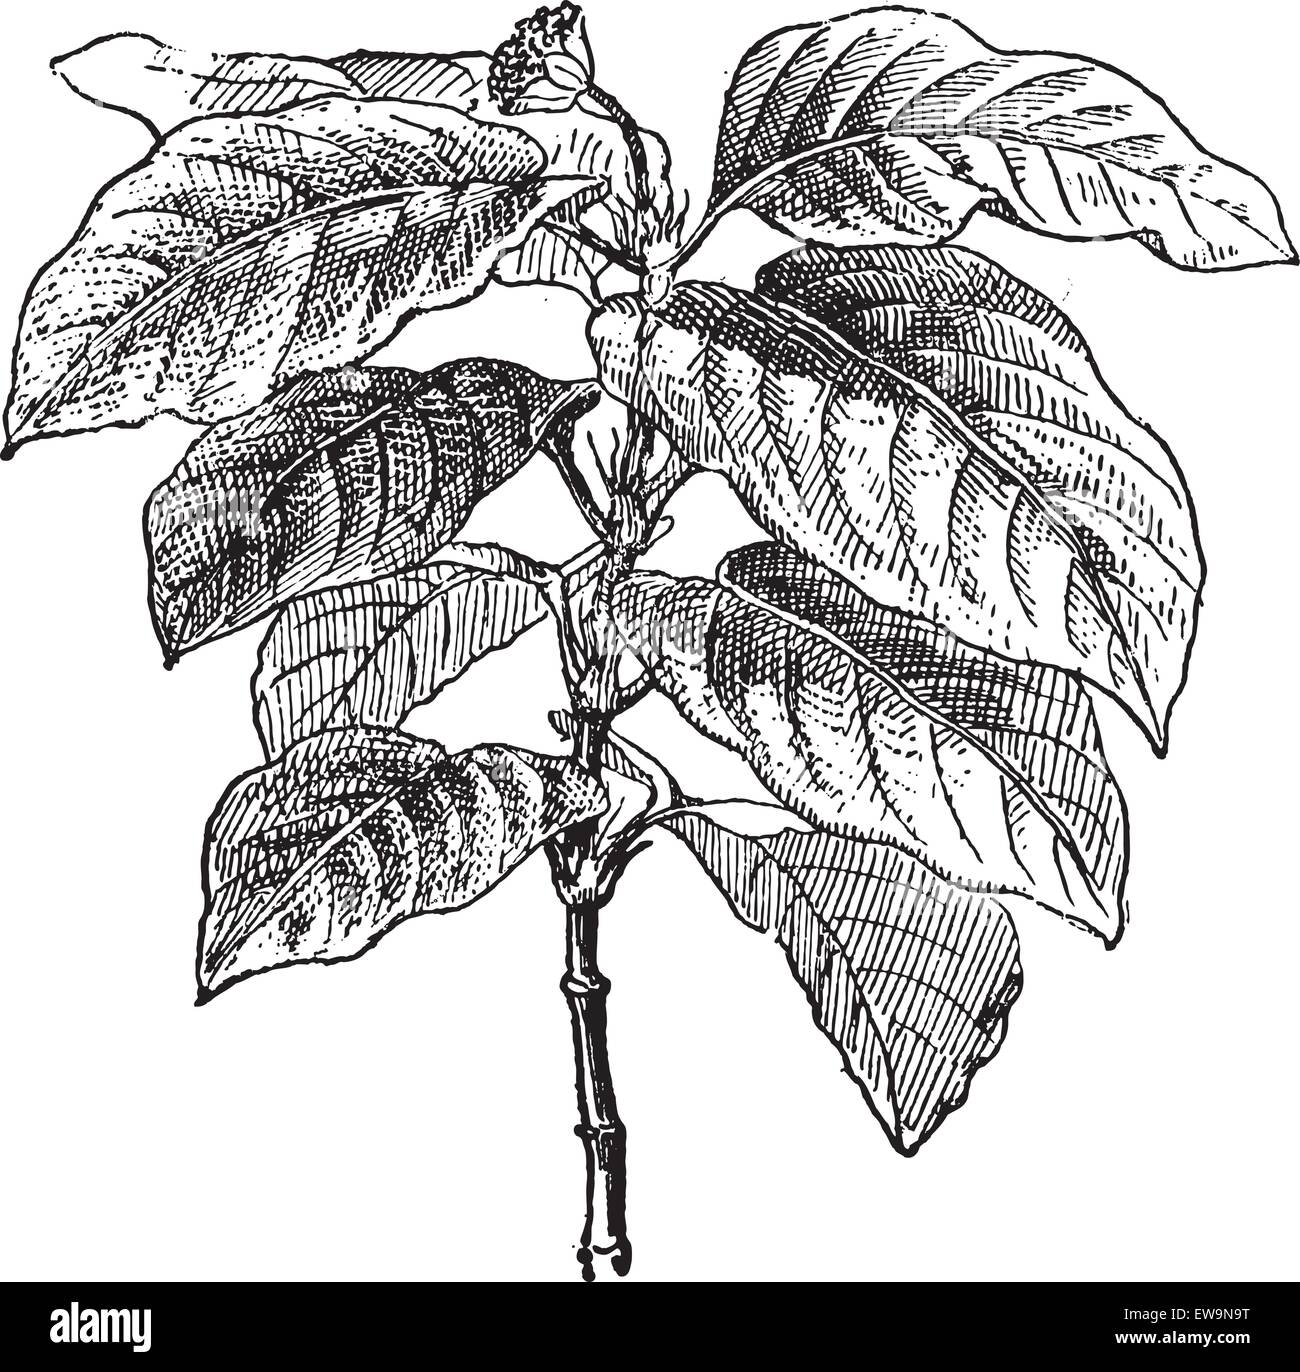 Ipecacuanha or Psychotria, vintage engraved illustration. Dictionary of words and things - Larive and Fleury - 1895. Stock Vector